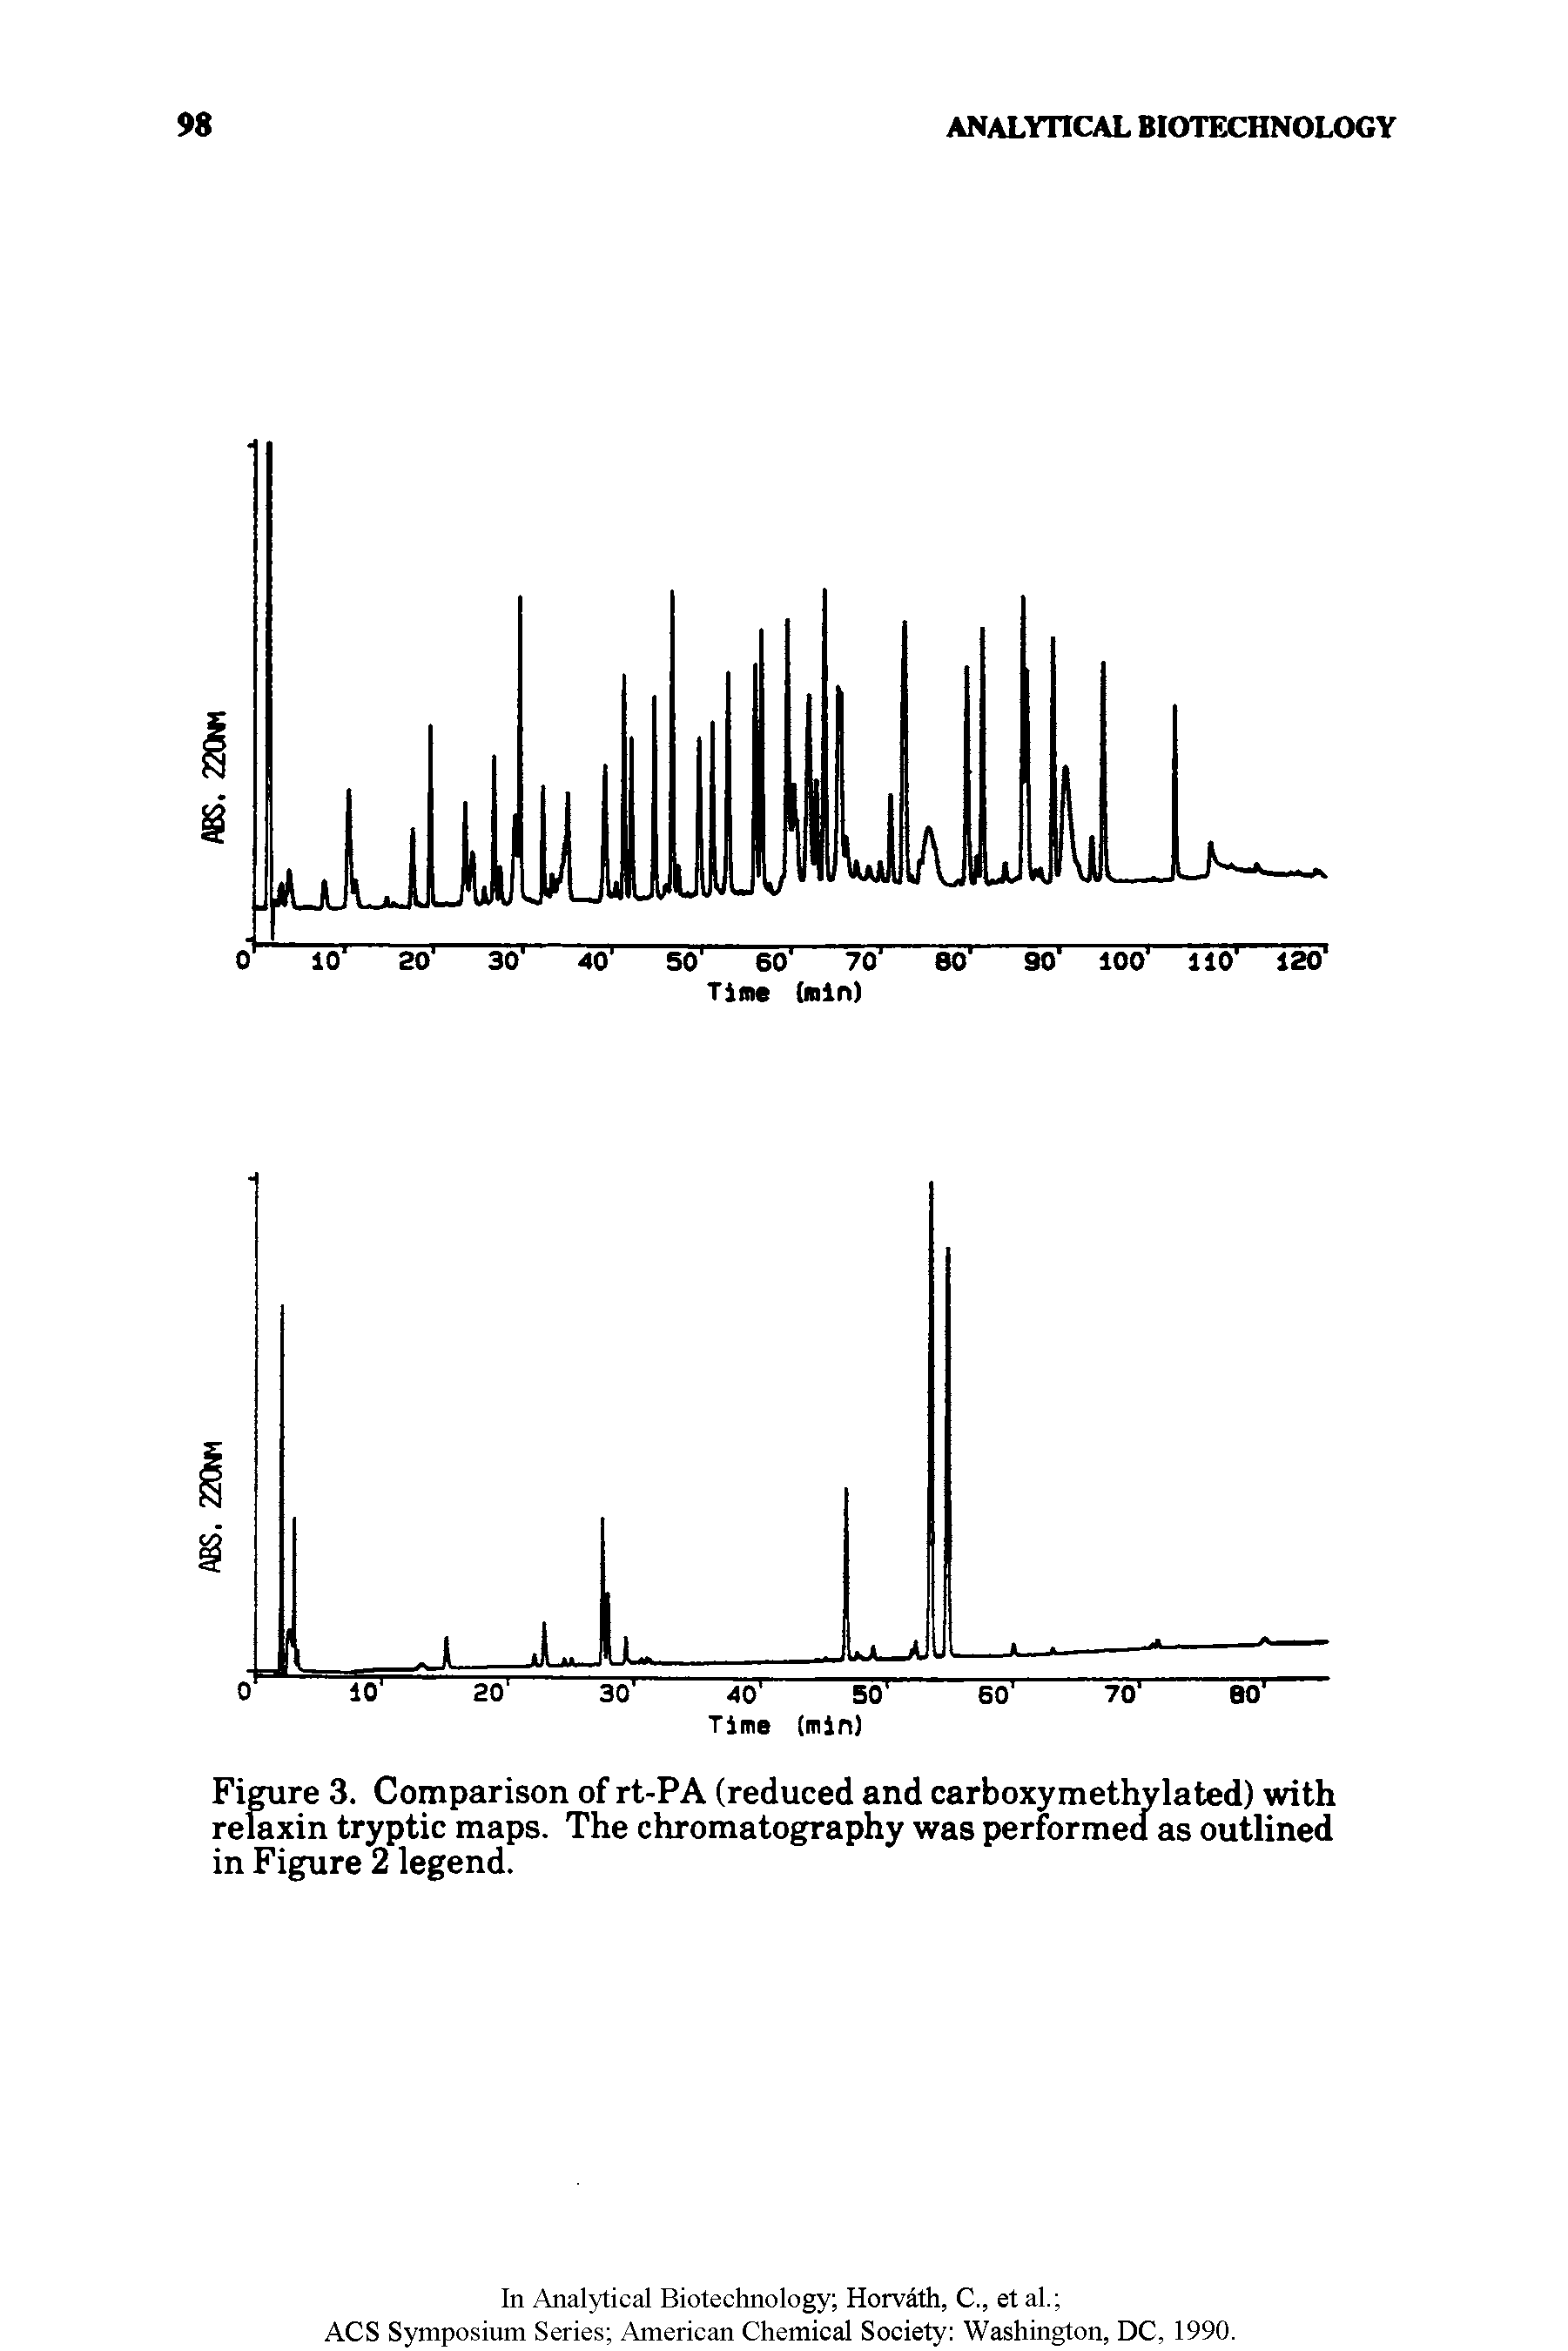 Figure 3. Comparison of rt-PA (reduced and carboxymethylated) with relaxin tryptic maps. The chromatography was performed as outlined in Figure 2 legend.